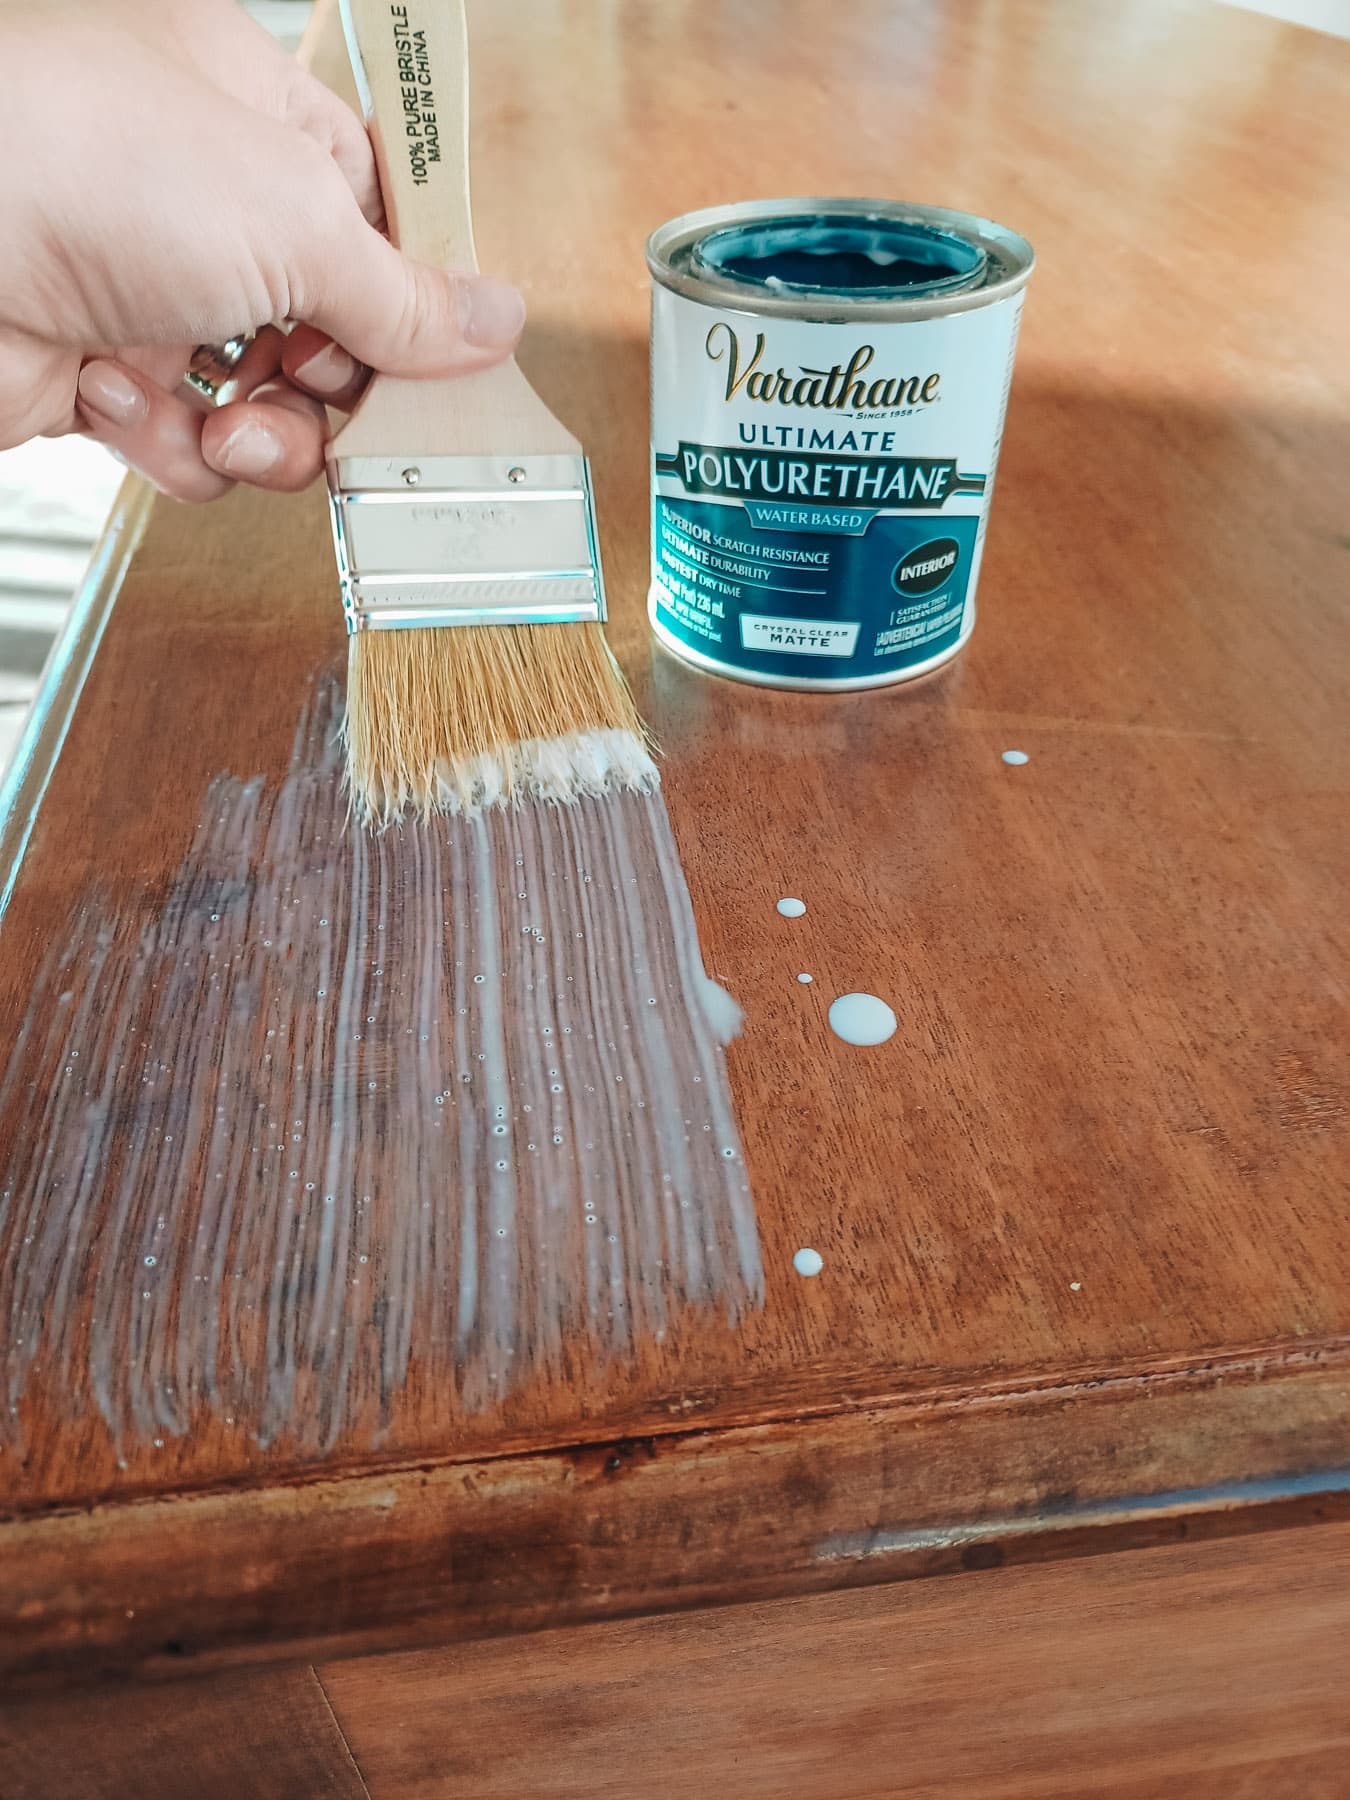 How To Seal Furniture so it's 100% Waterproof